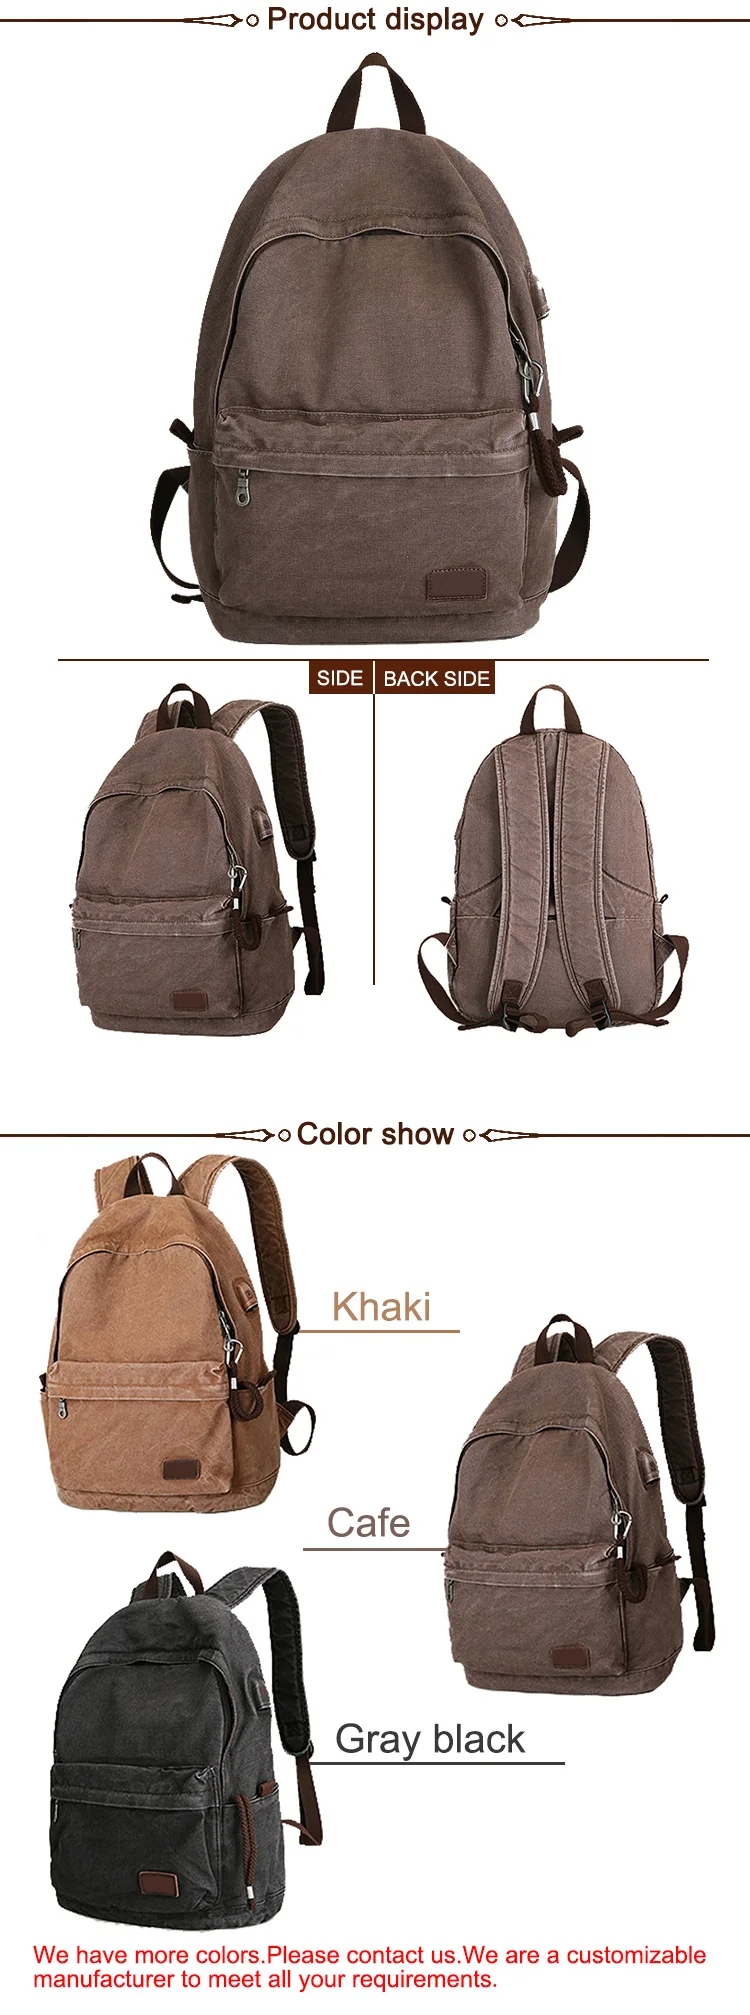 Wholesale Special Design Anti-theft Laptop Backpack / Usb Charging Vintage Canvas Backpack